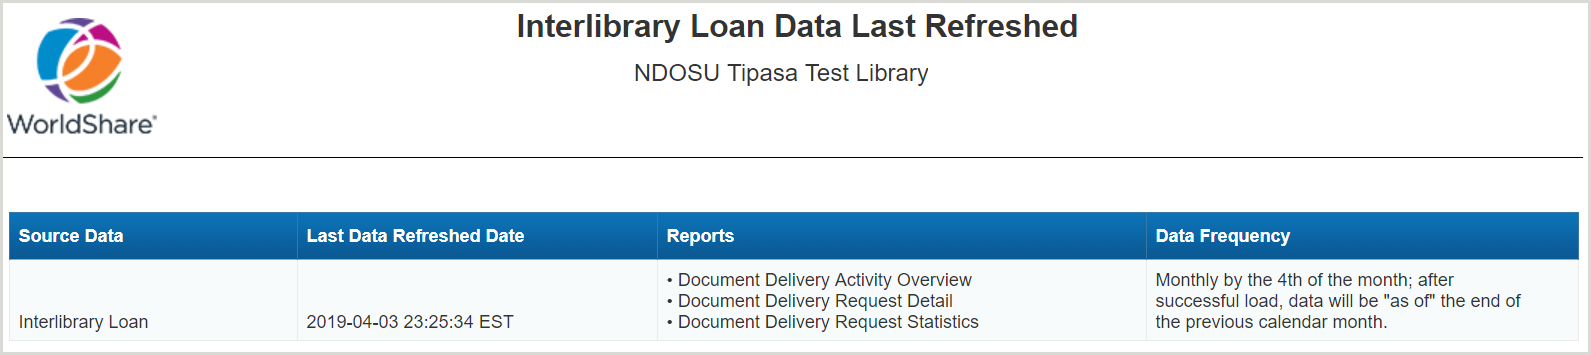 Interlibrary Loan Data Last Refreshed